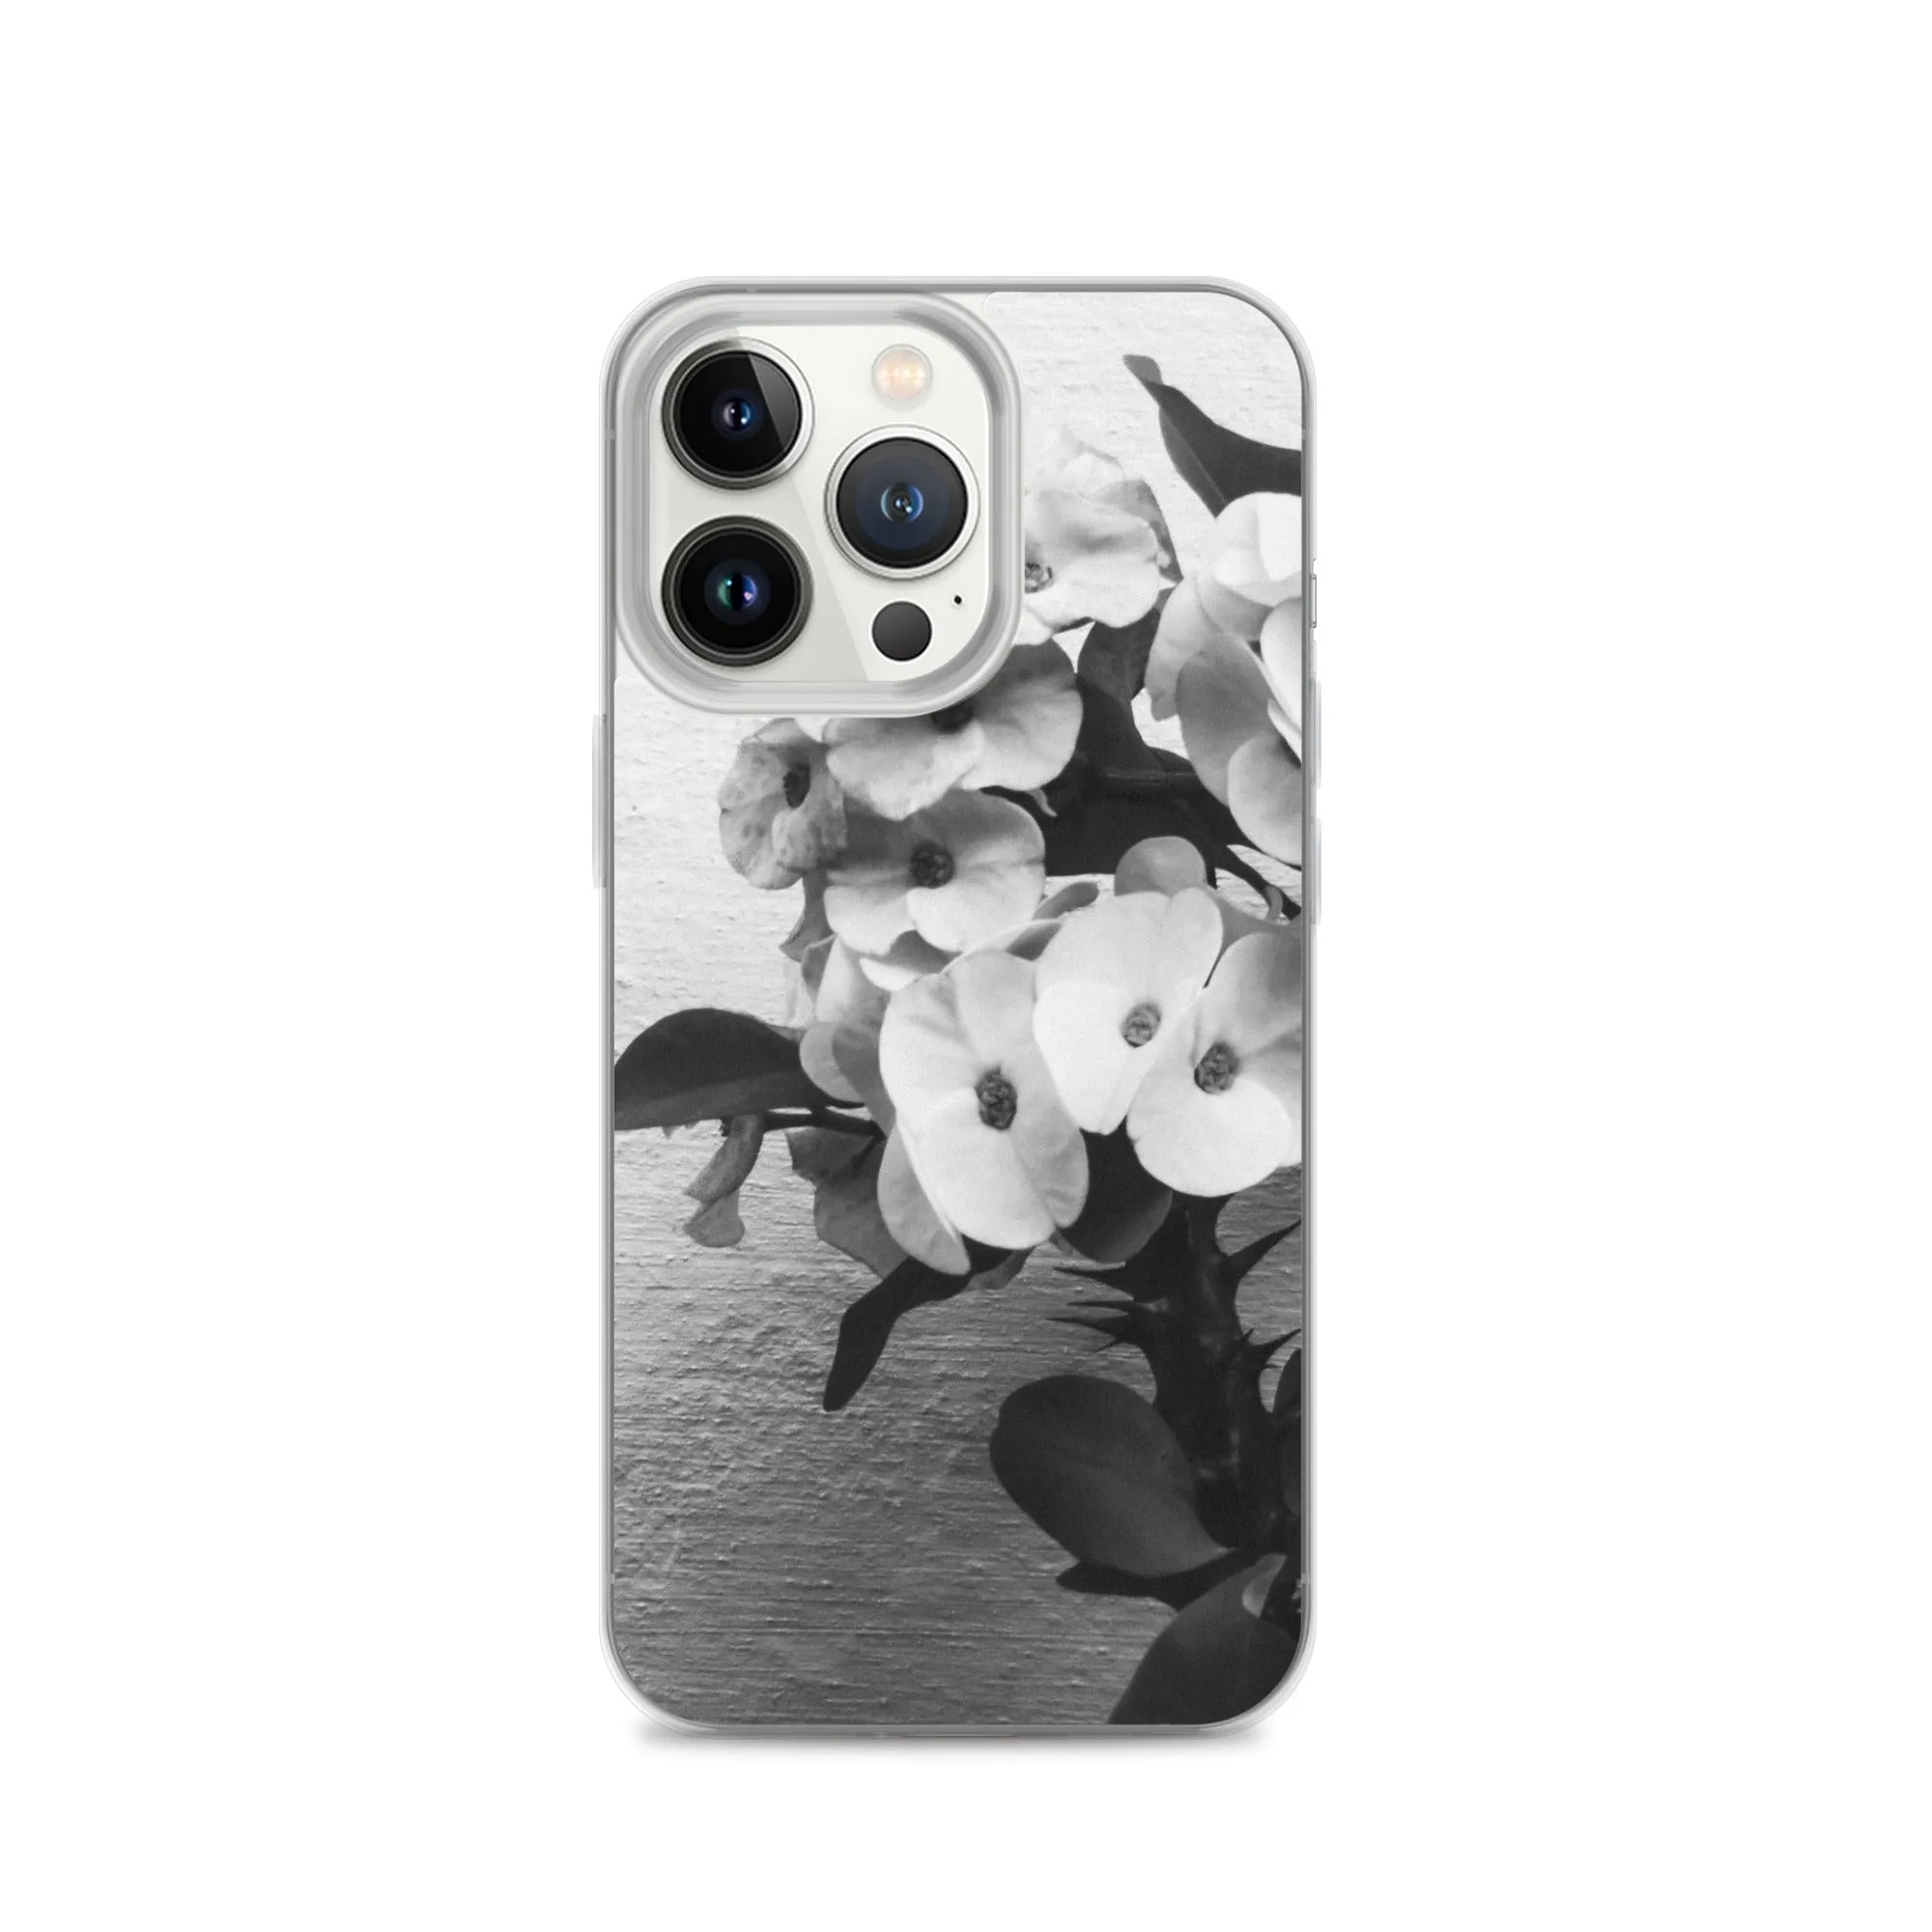 Wallflower Floral Iphone Case - Black And White - Iphone 13 Pro - Mobile Phone Cases - Aesthetic Art